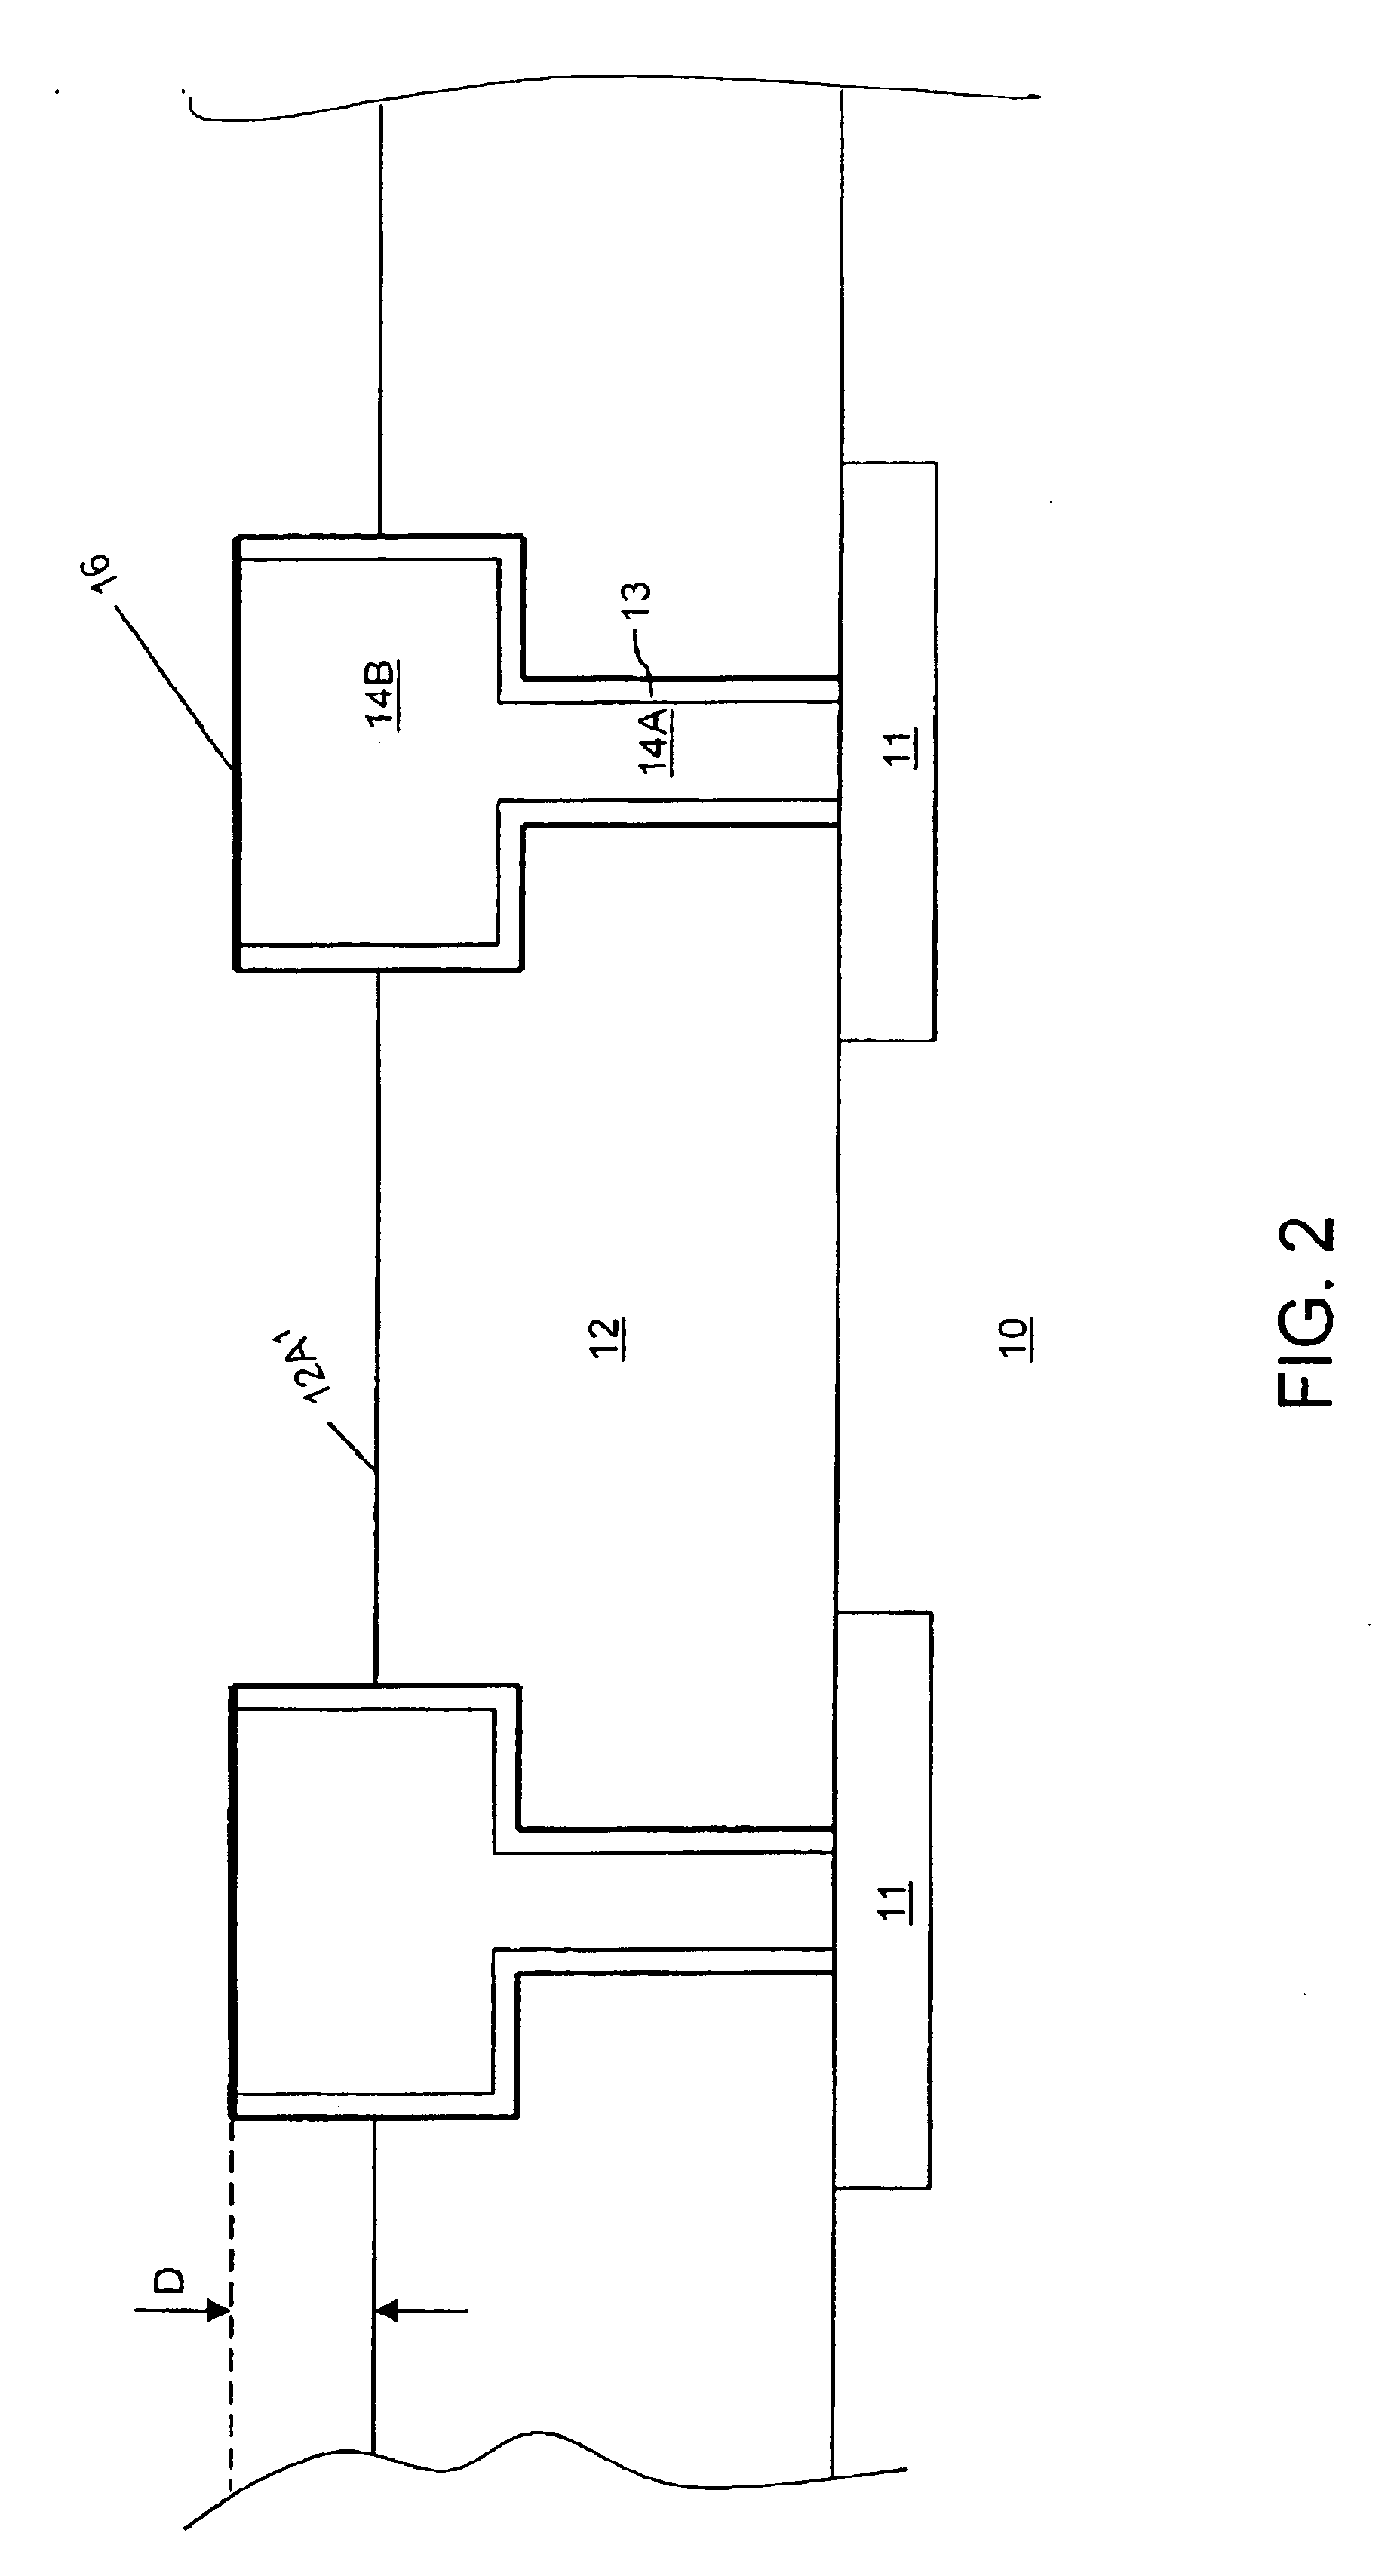 Method of treating inlaid copper for improved capping layer adhesion without damaging porous low-k materials